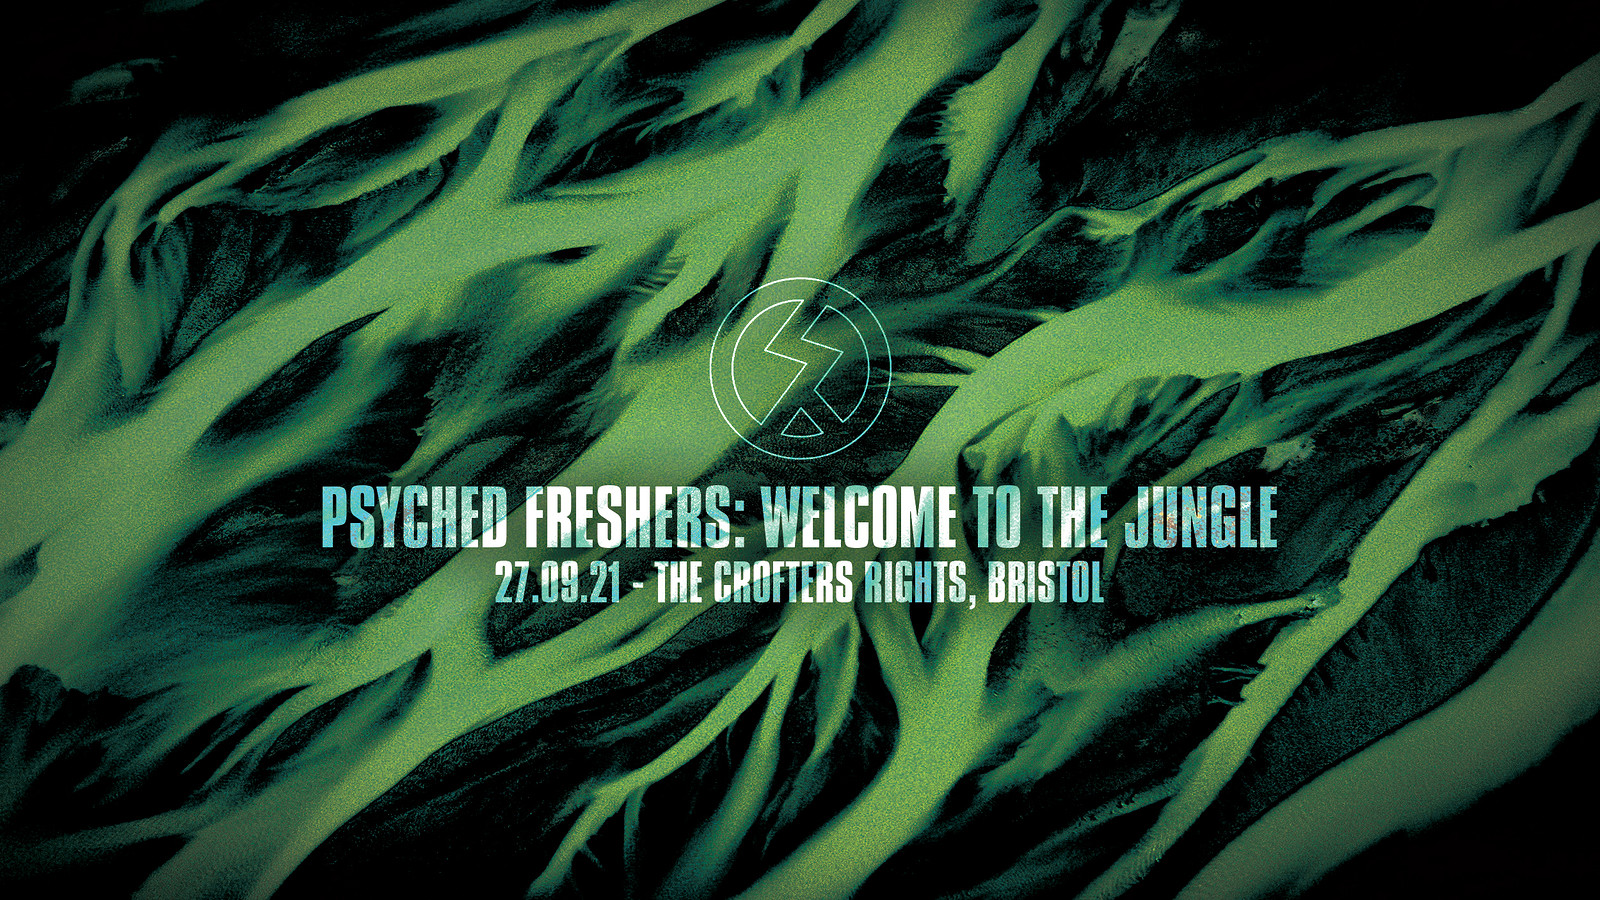 Psyched Freshers: Welcome to the Jungle at Crofters Rights